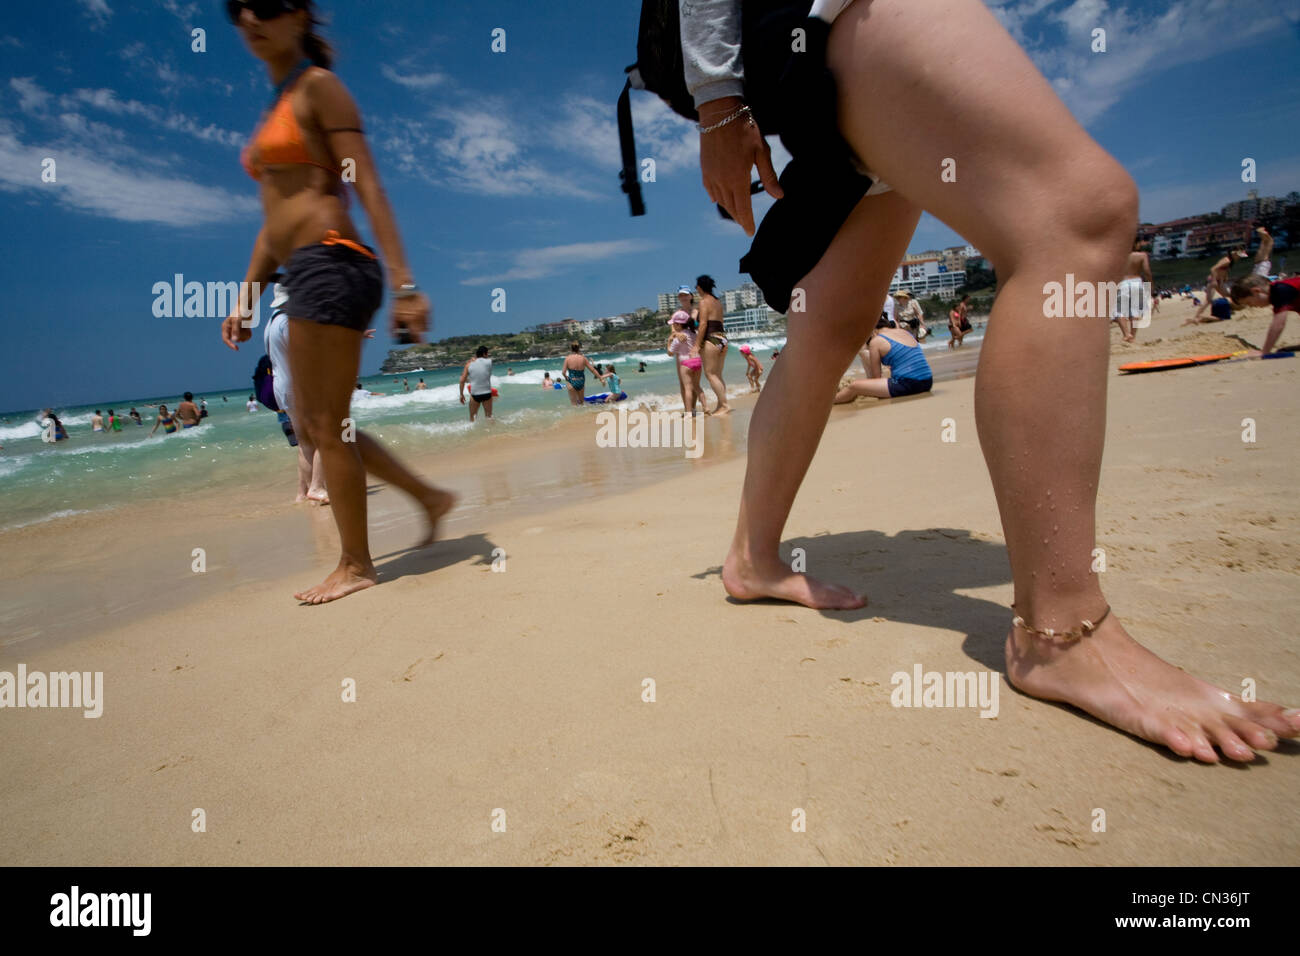 Australia, New South Wales, Sydney, women going out of the water at the Bondi beach Stock Photo